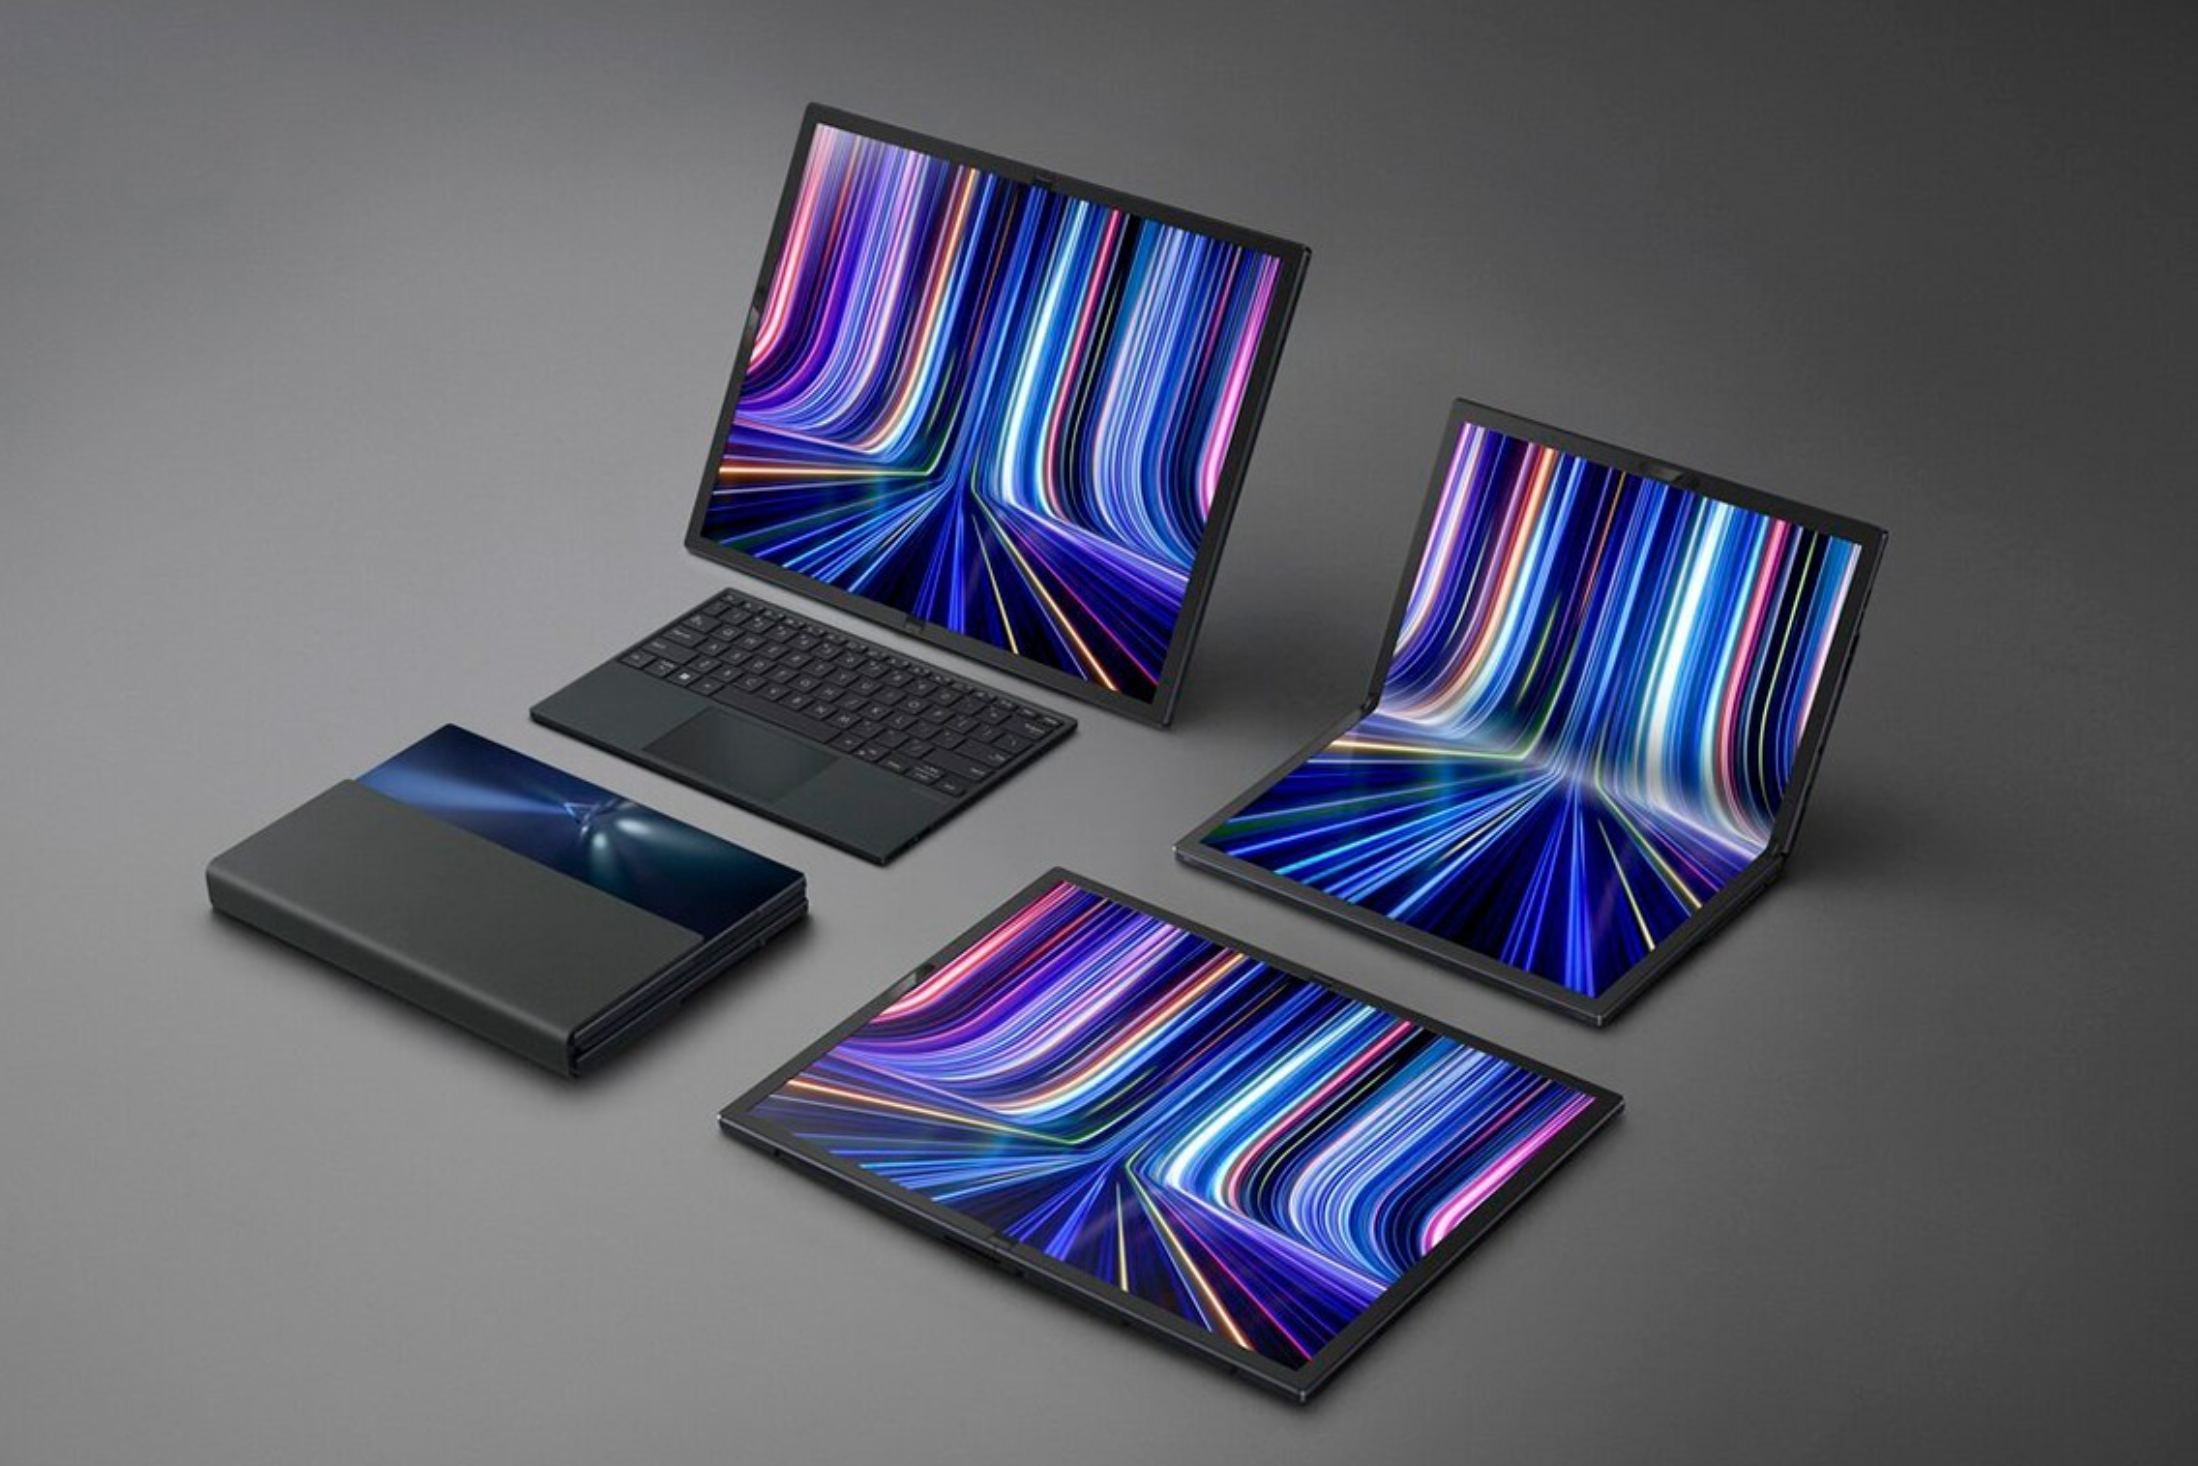 ASUS Introduces World's First 17-Inch Foldable OLED Laptop